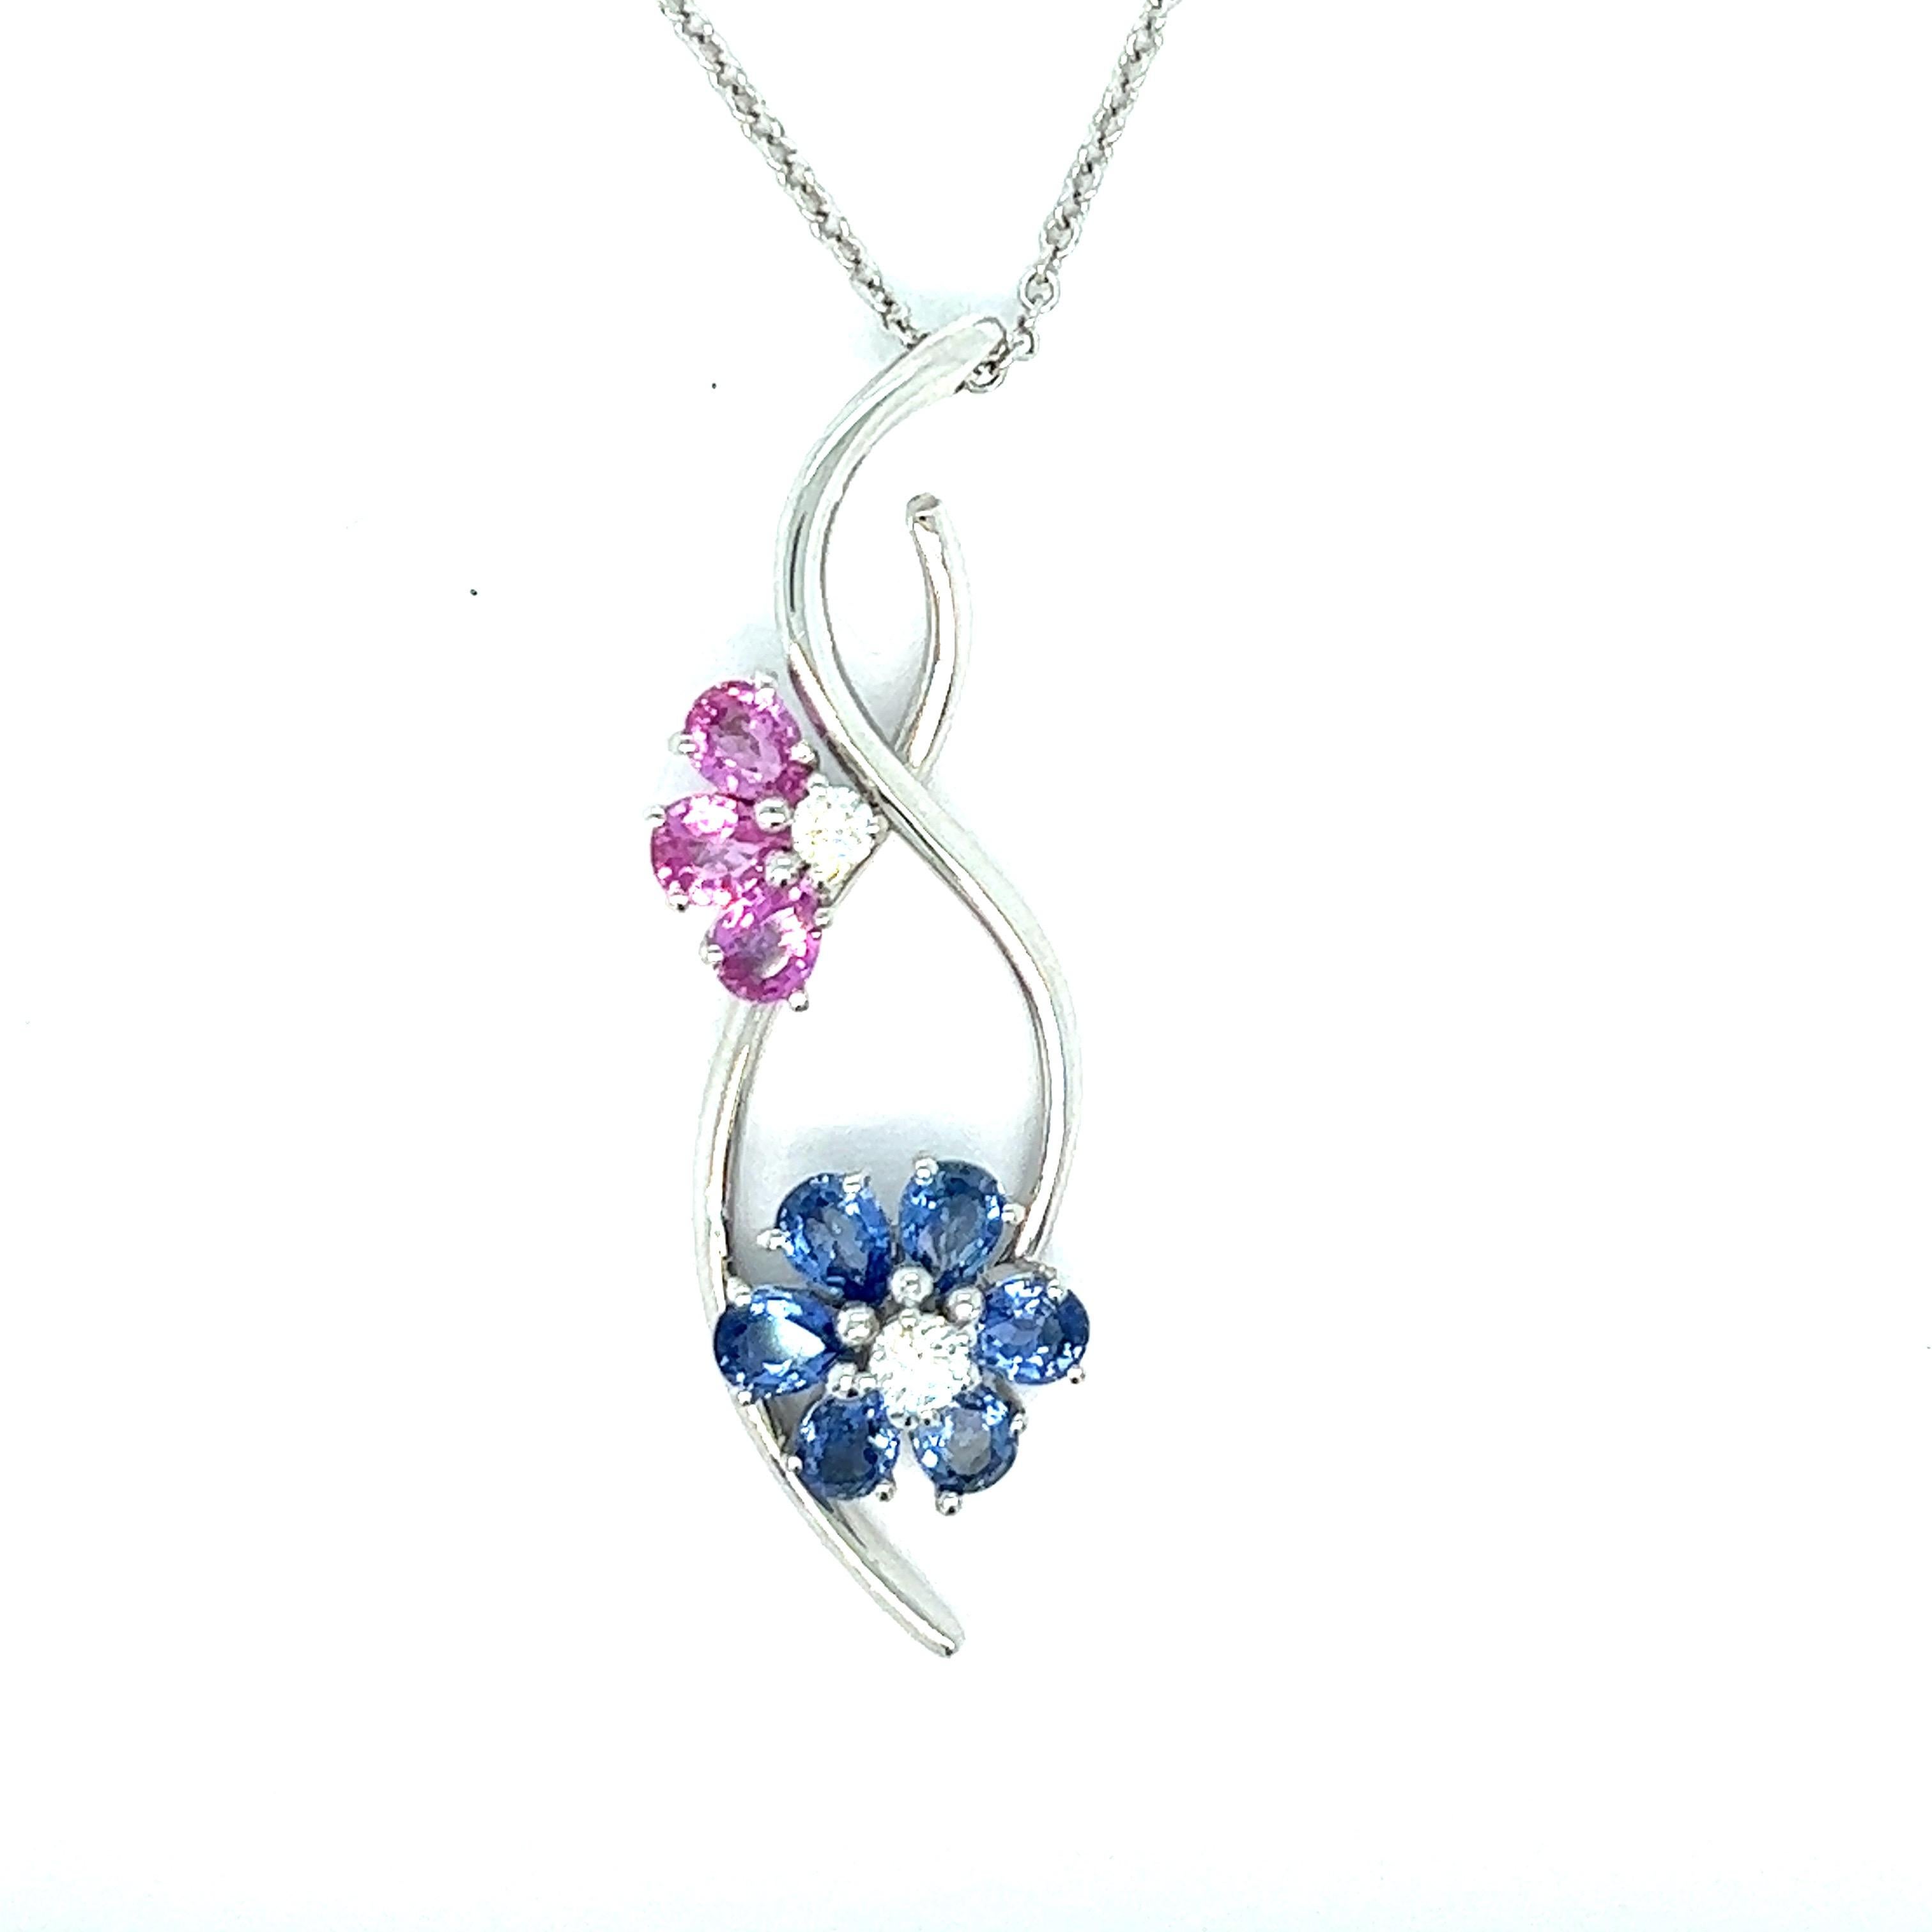 Blue and pink sapphire flower pendant necklace

Pear-shaped blue and pink sapphires of approximately 2 carats, 18 karat white gold, flower motif; chain marked 750, Leo Pizzo

Size: pendant width 0.5 inch, length 1.5 inches; chain length 16.5